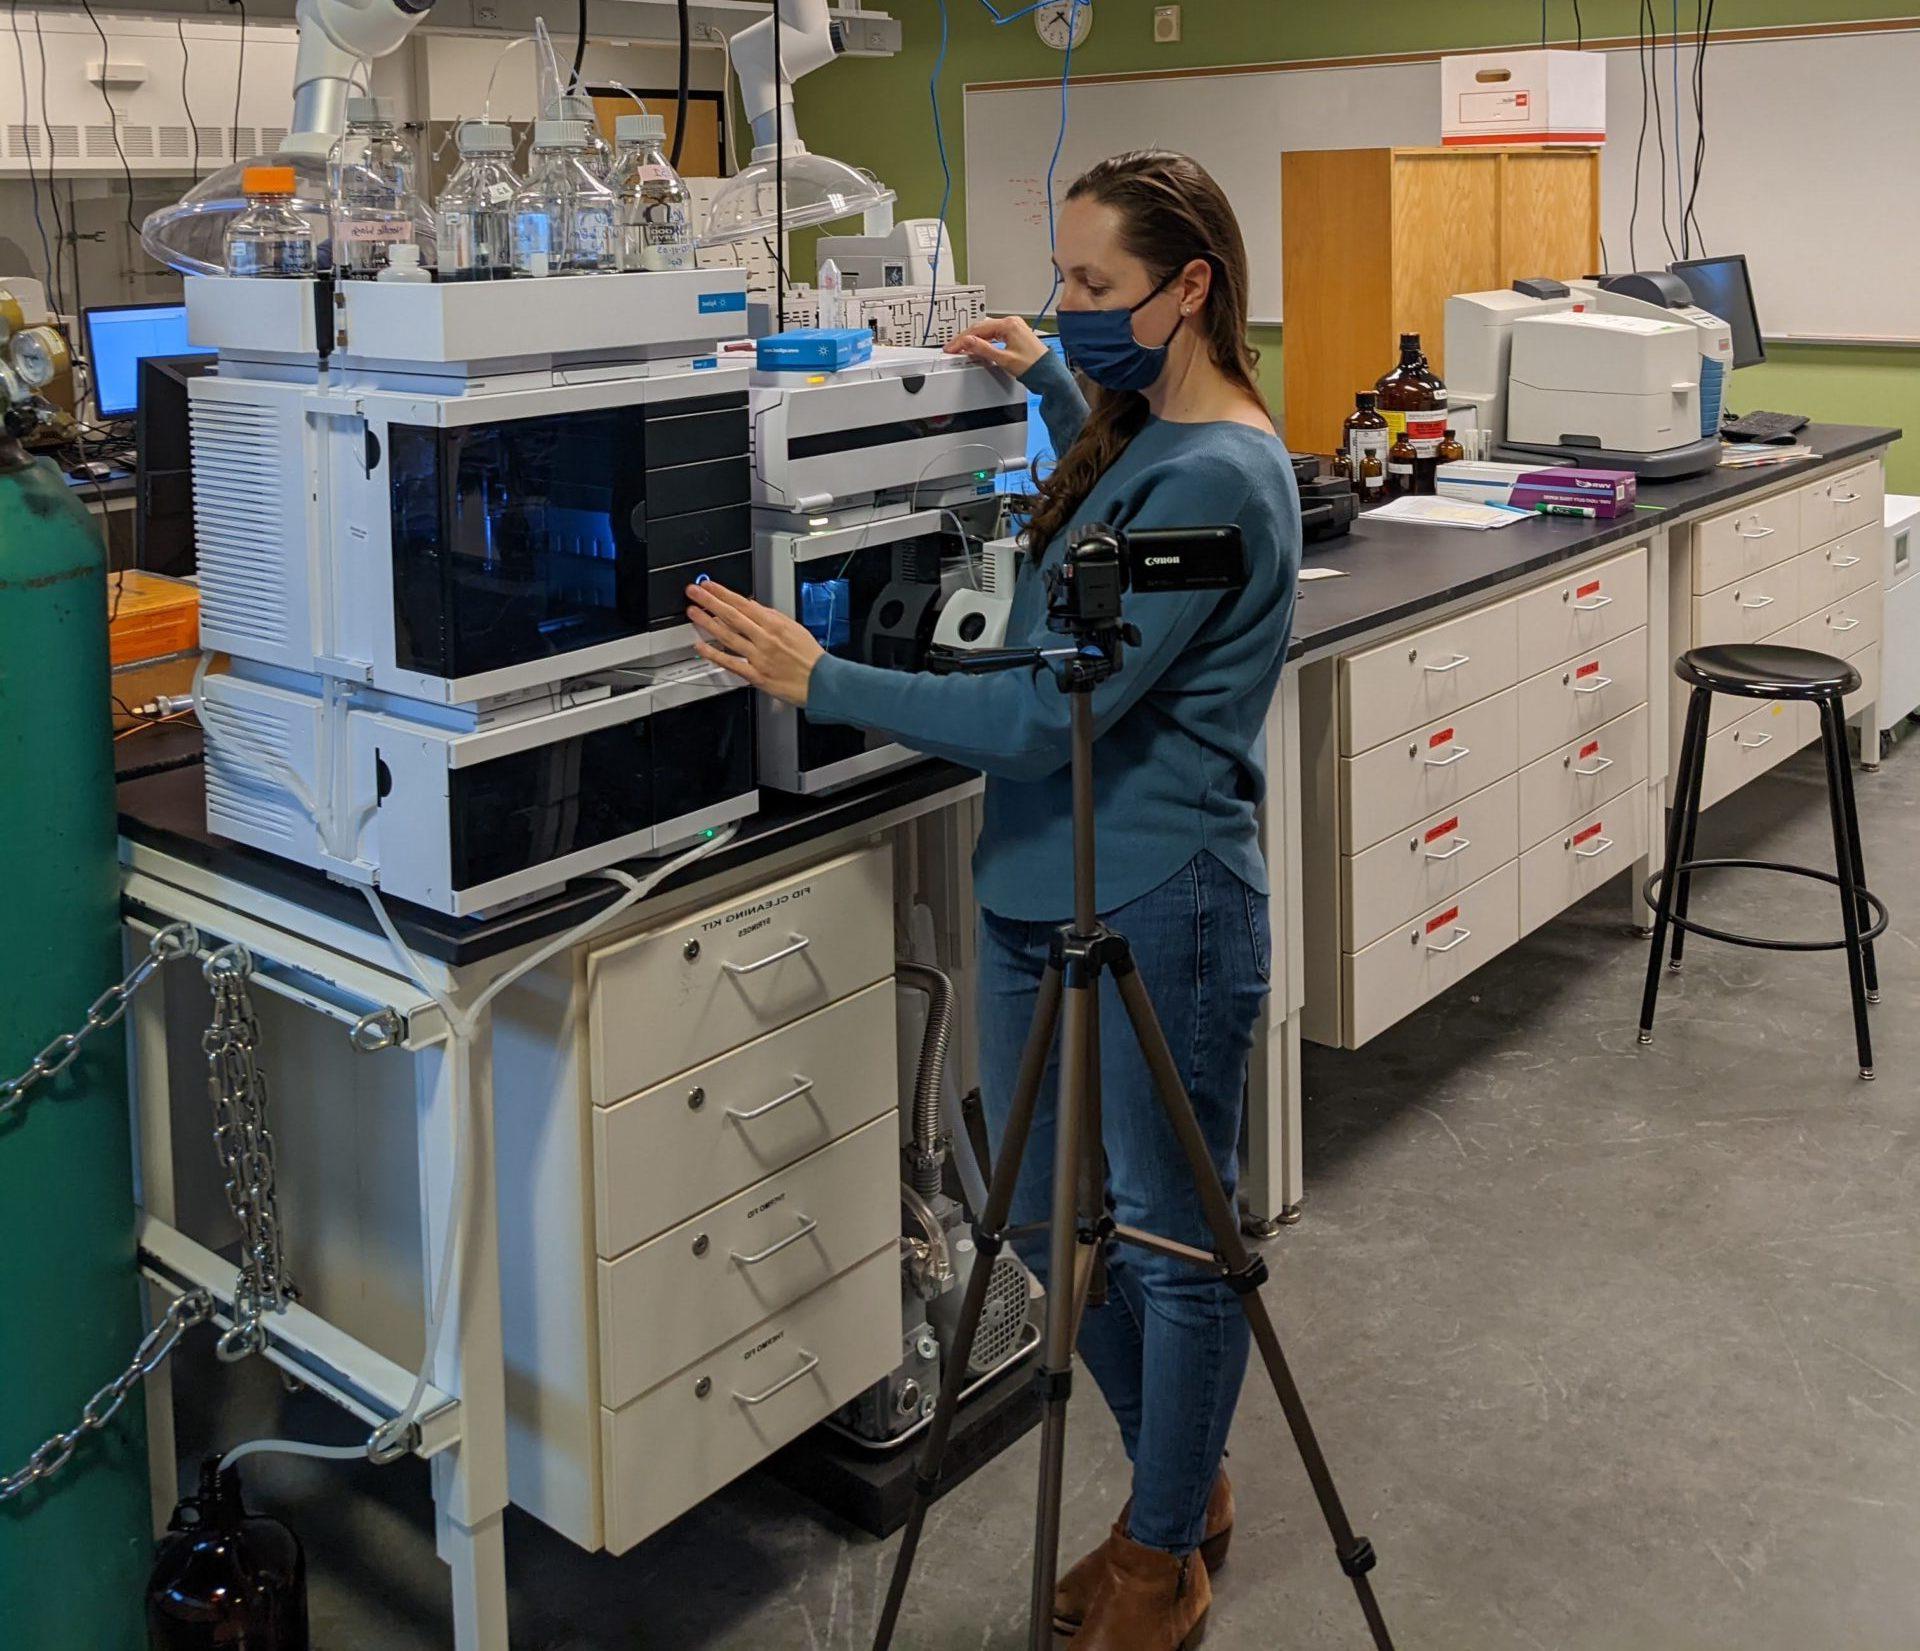 Dr. Alycia Palmer recording videos about the LC-MS in the chemistry department